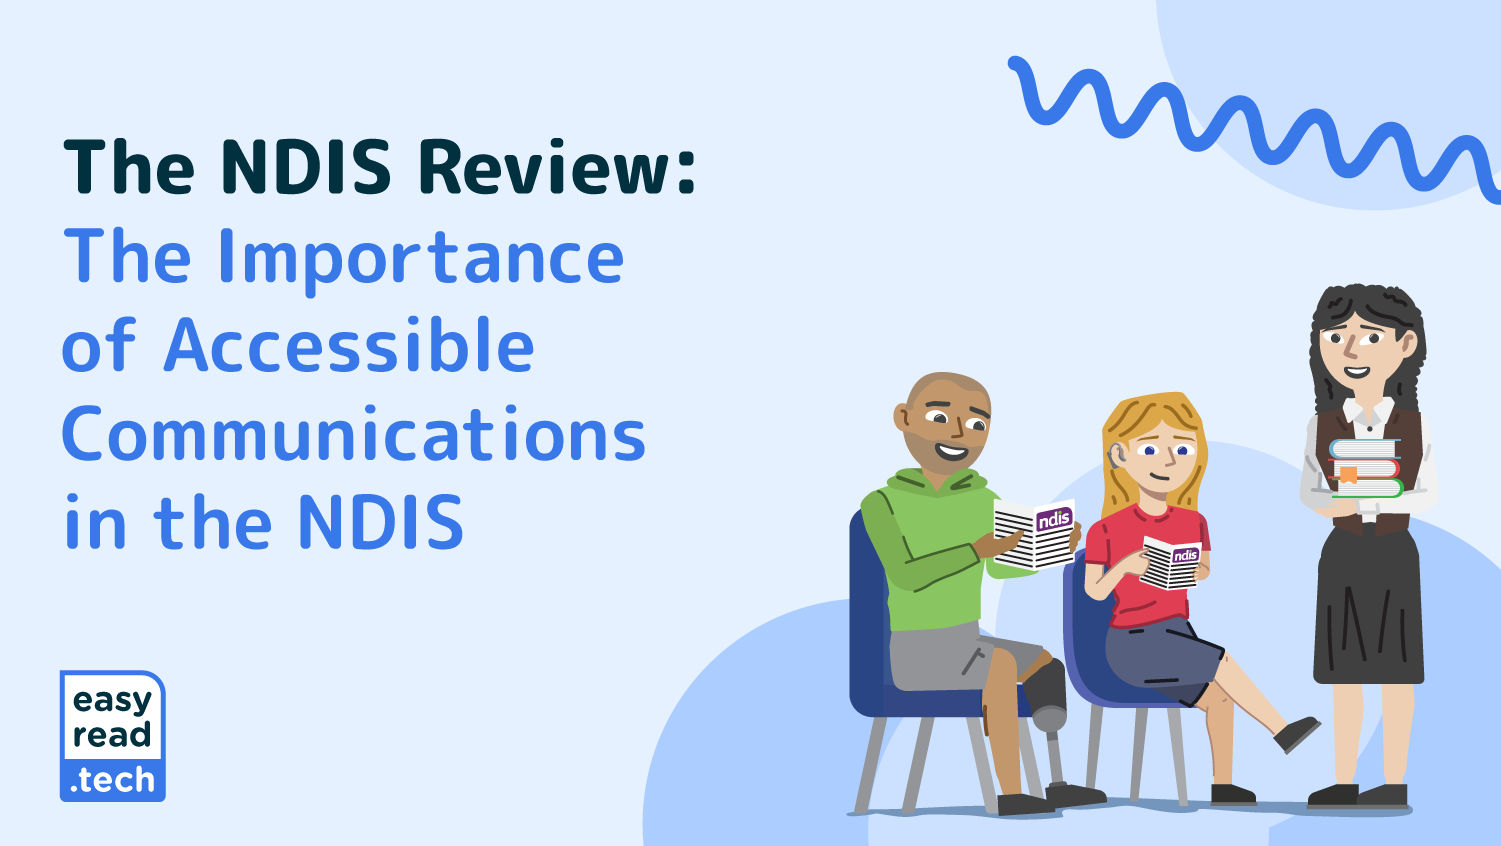 The NDIS Review: The Importance of Accessible Communications in the NDIS